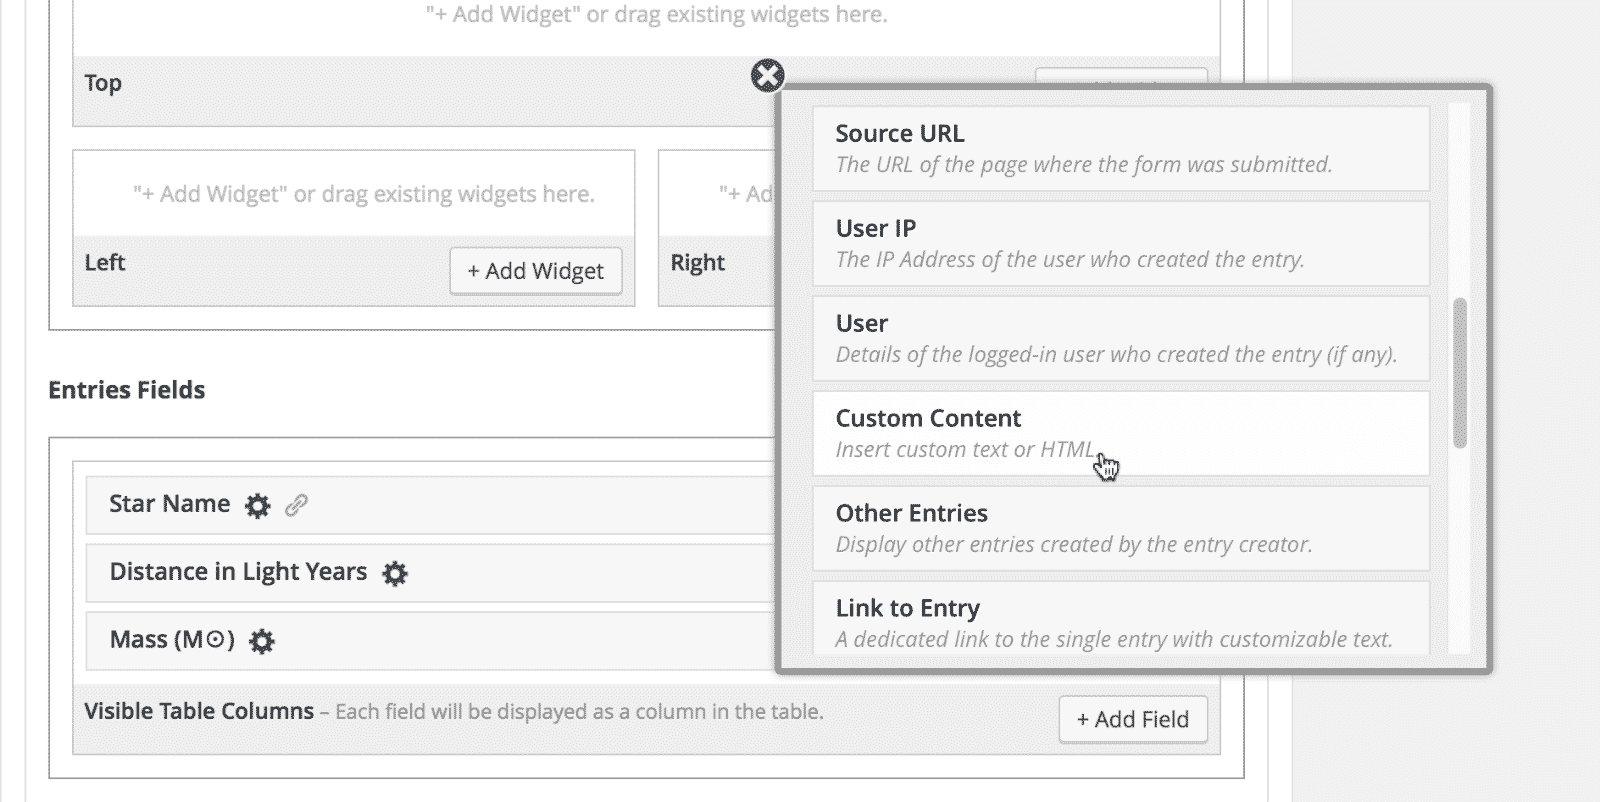 The list of fields in GravityView showing the Custom Content field